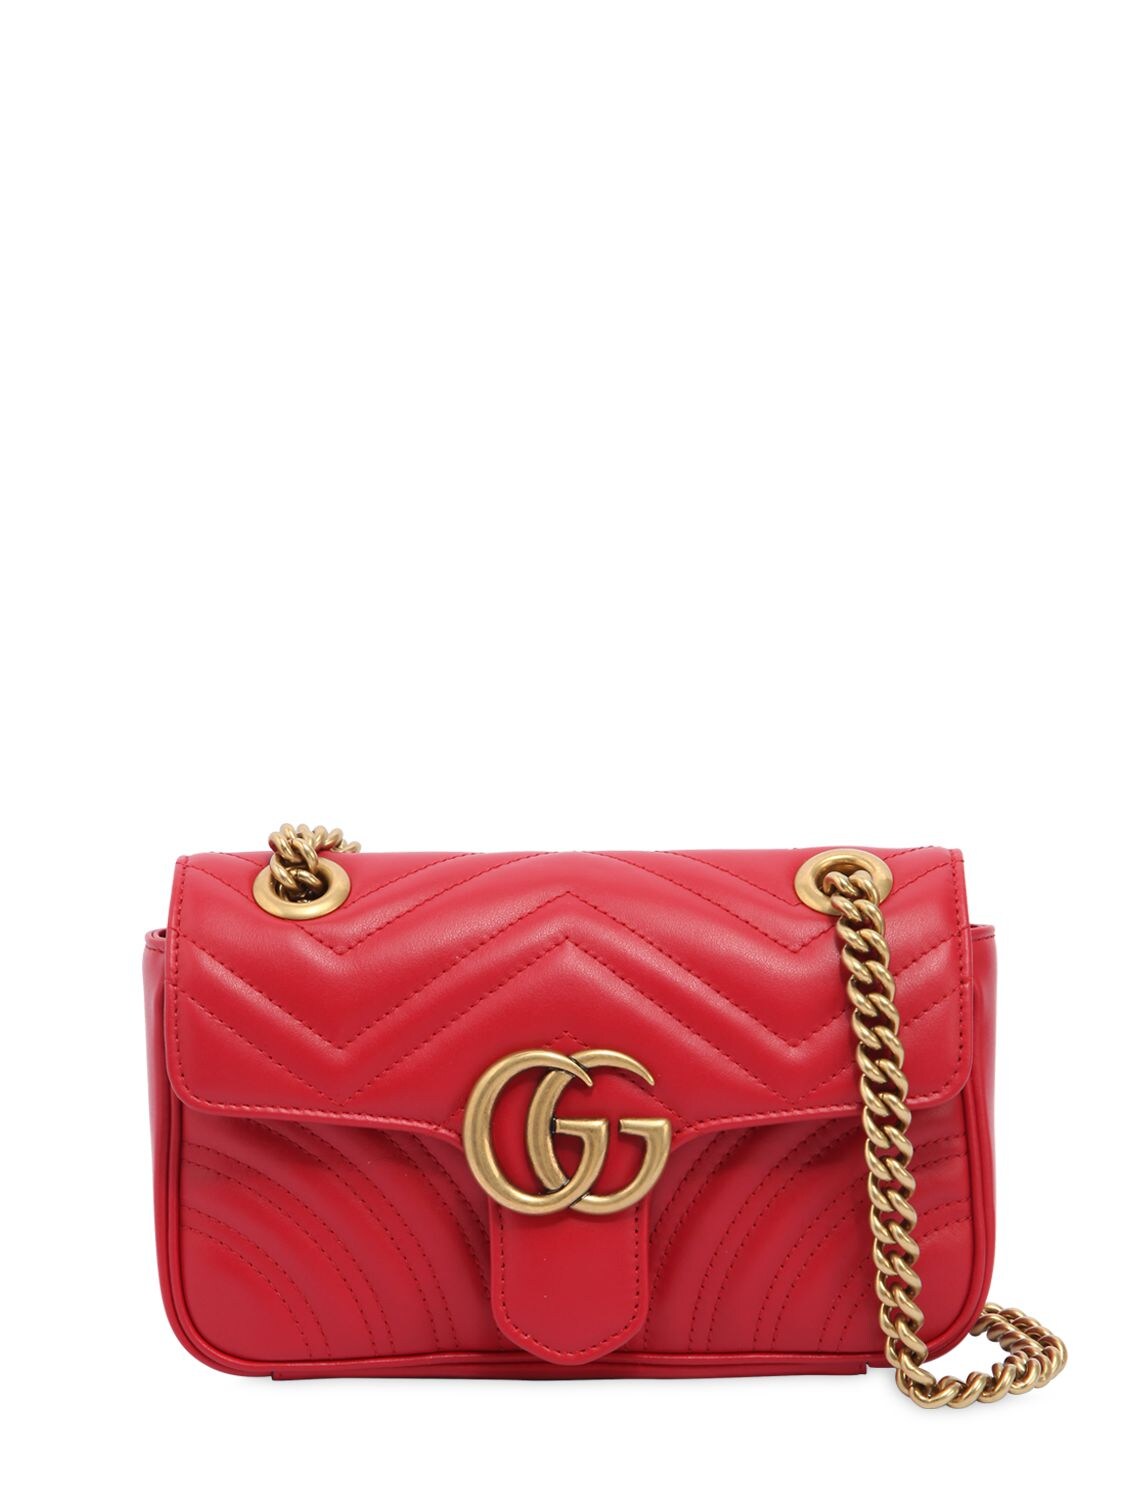 gucci marmont 2.0 leather crossbody bag